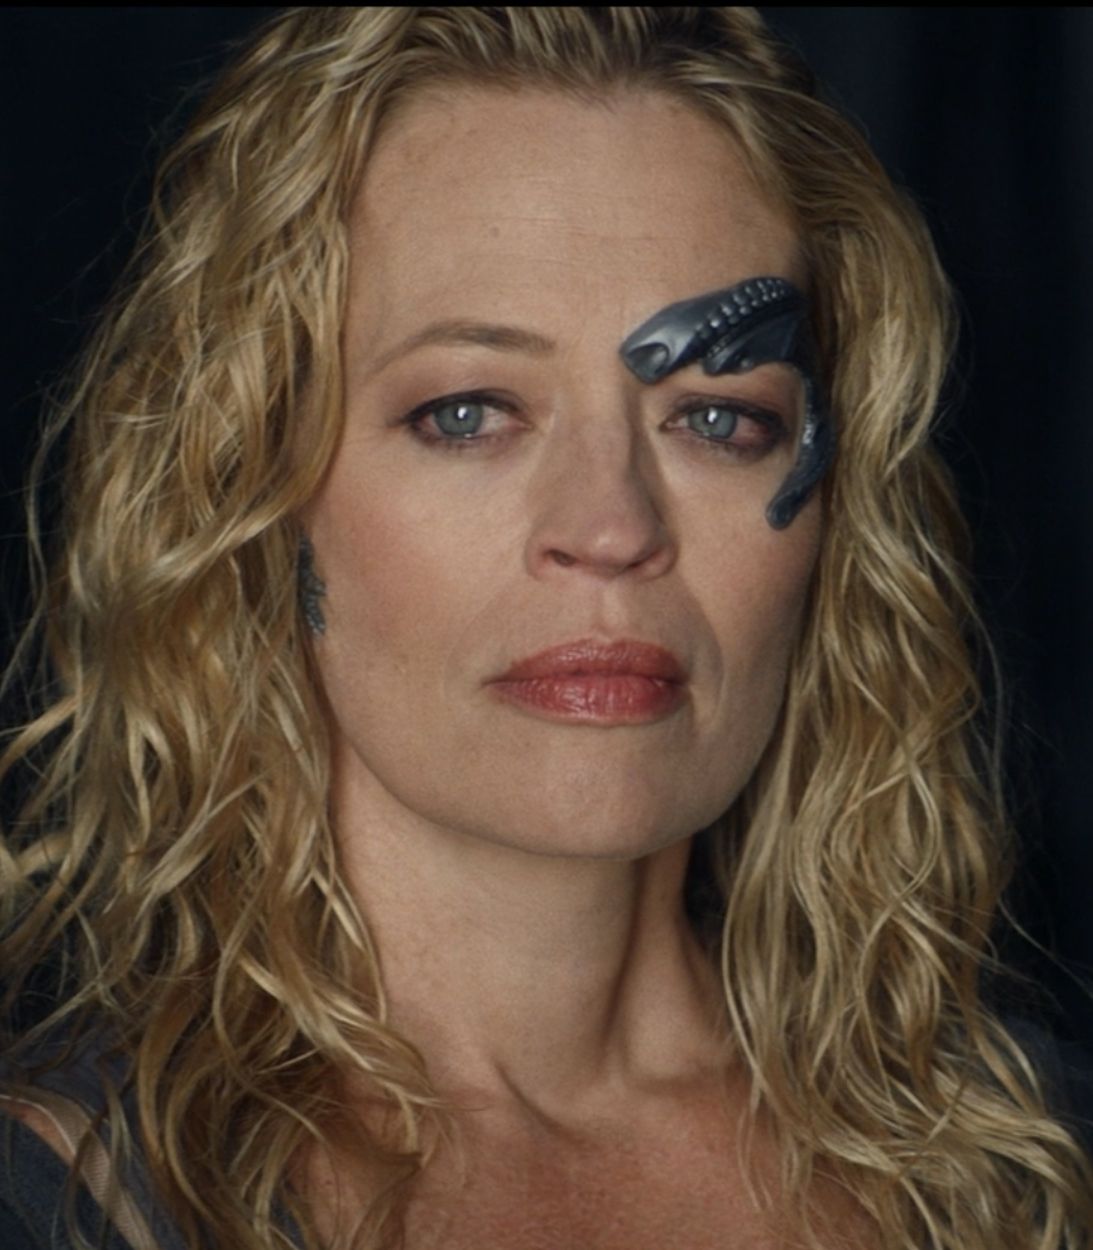 Seven of Nine with tears in her eyes from Star Trek: Picard.